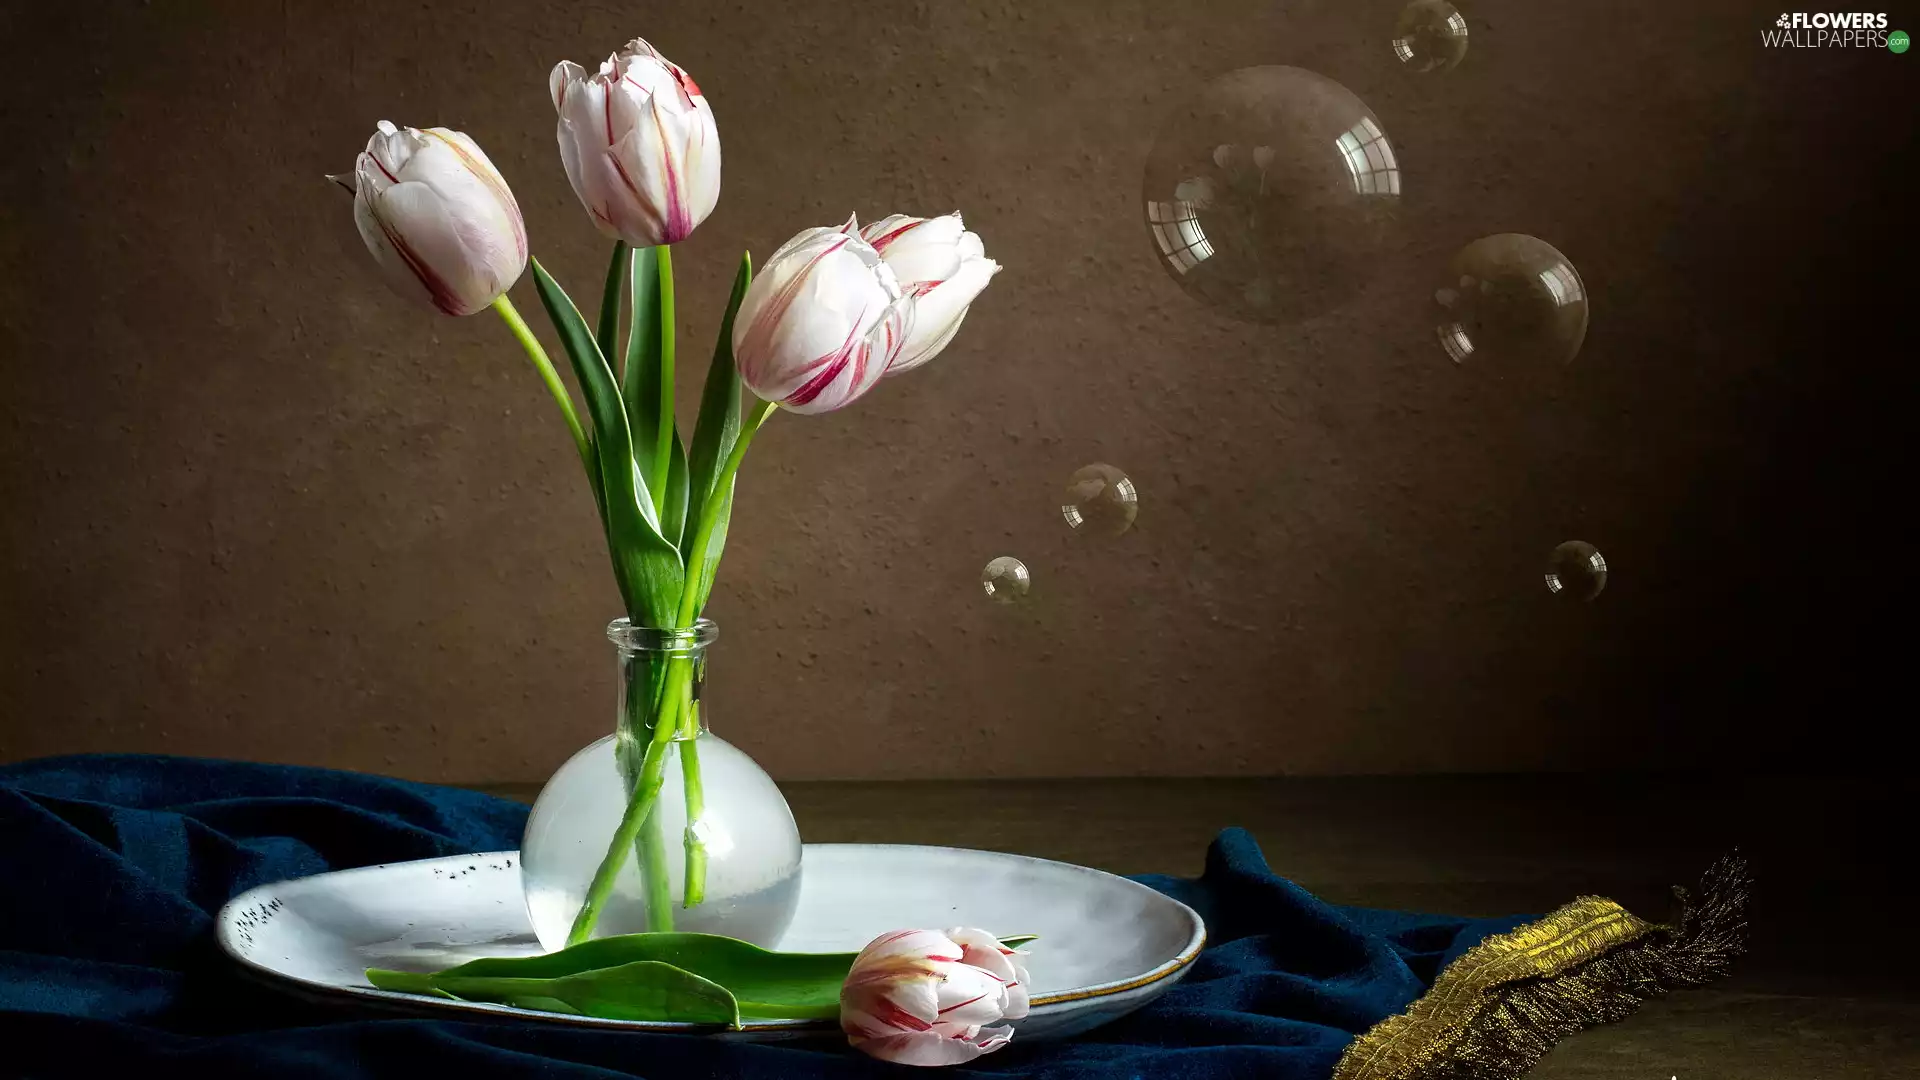 vase, Tulips, interesting eyes, composition, plate, glass